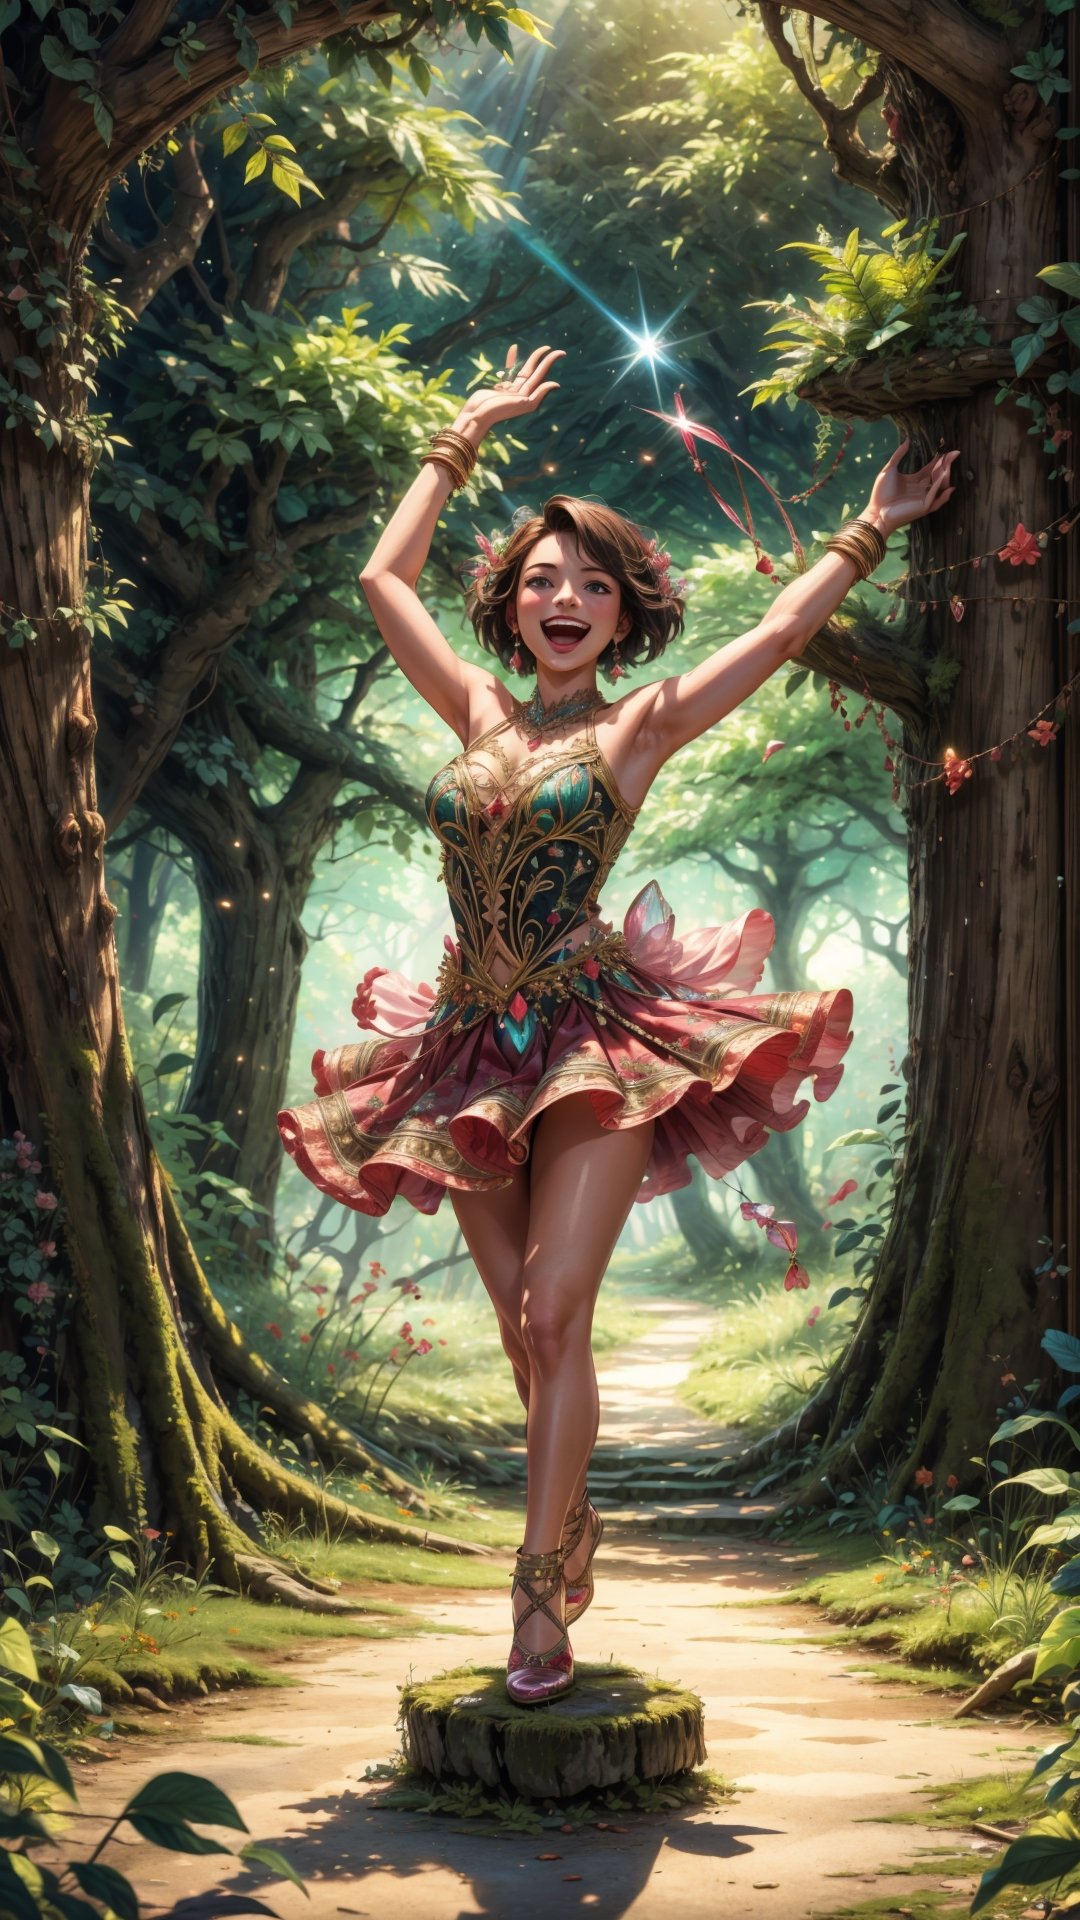 (4k), (masterpiece), (best quality),(extremely intricate), (realistic), (sharp focus), (award winning), (cinematic lighting), (extremely detailed),

A girl dancing with fairies in a magical forest, her laughter echoing through the trees.

,EpicSky,Isometric_Setting,DonMBl00mingF41ryXL ,TreeAIv2,phcrystal